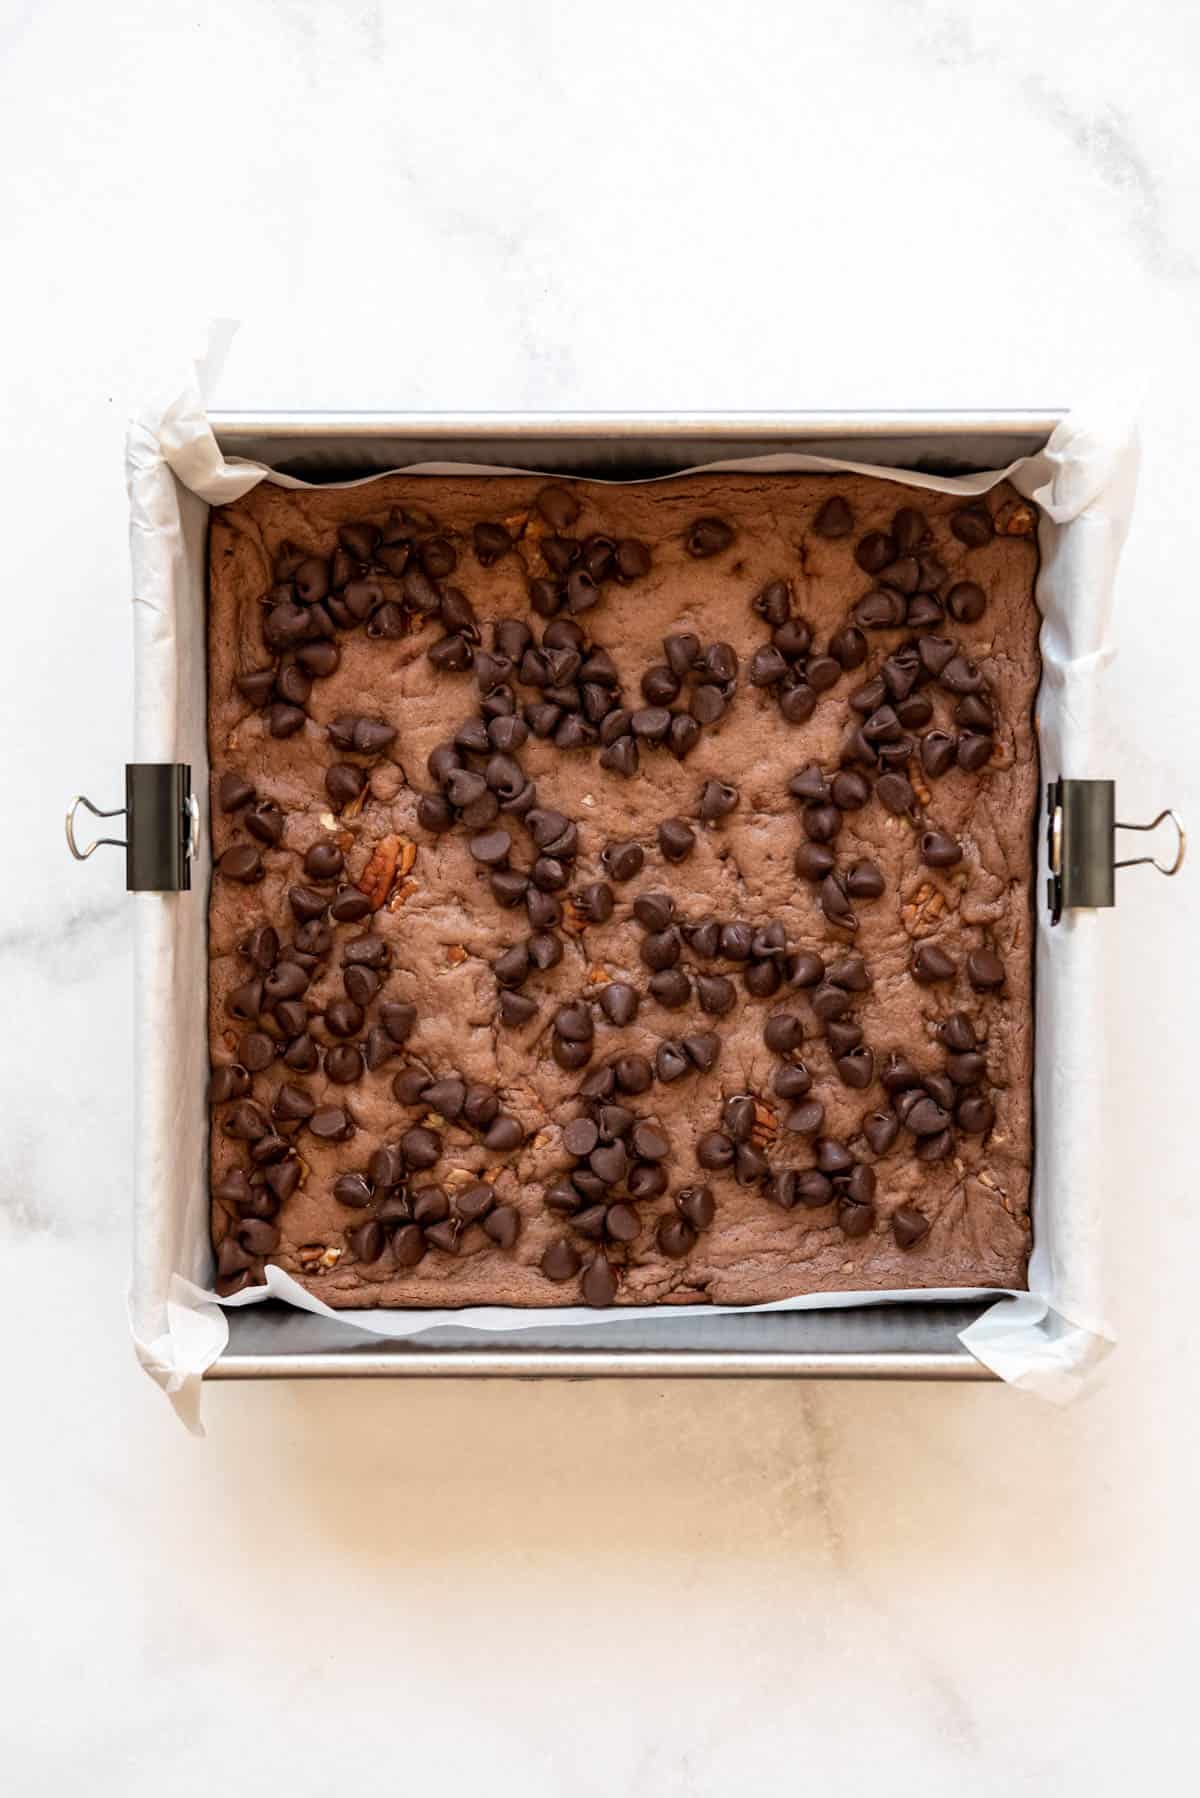 Chocolate chips sprinkled over partially cooked brownies in a square pan.